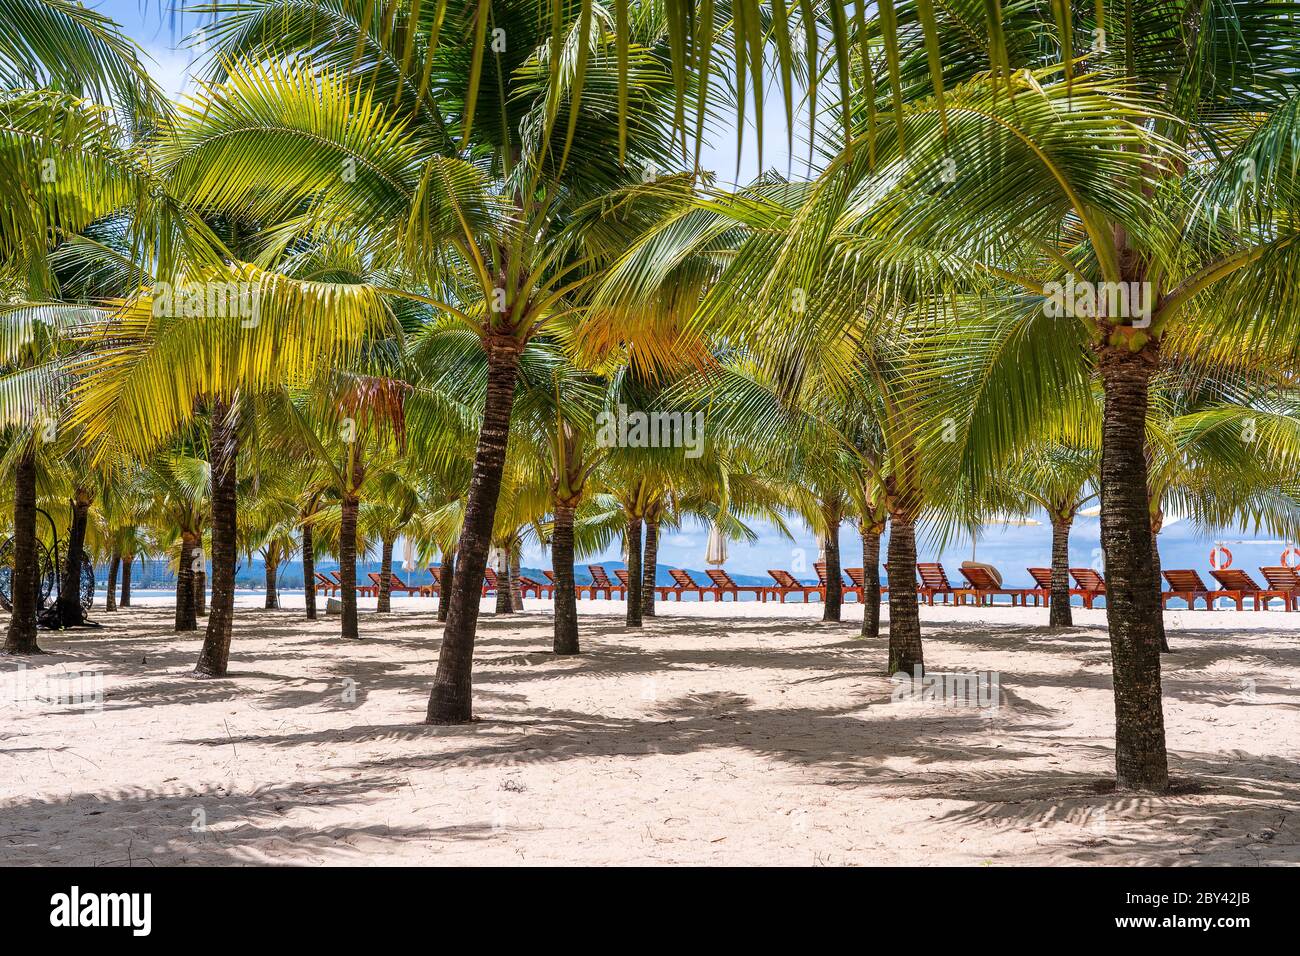 Green coconut palm trees and sun loungers on white sandy beach near South China Sea on the island of Phu Quoc, Vietnam. Travel and nature concept Stock Photo